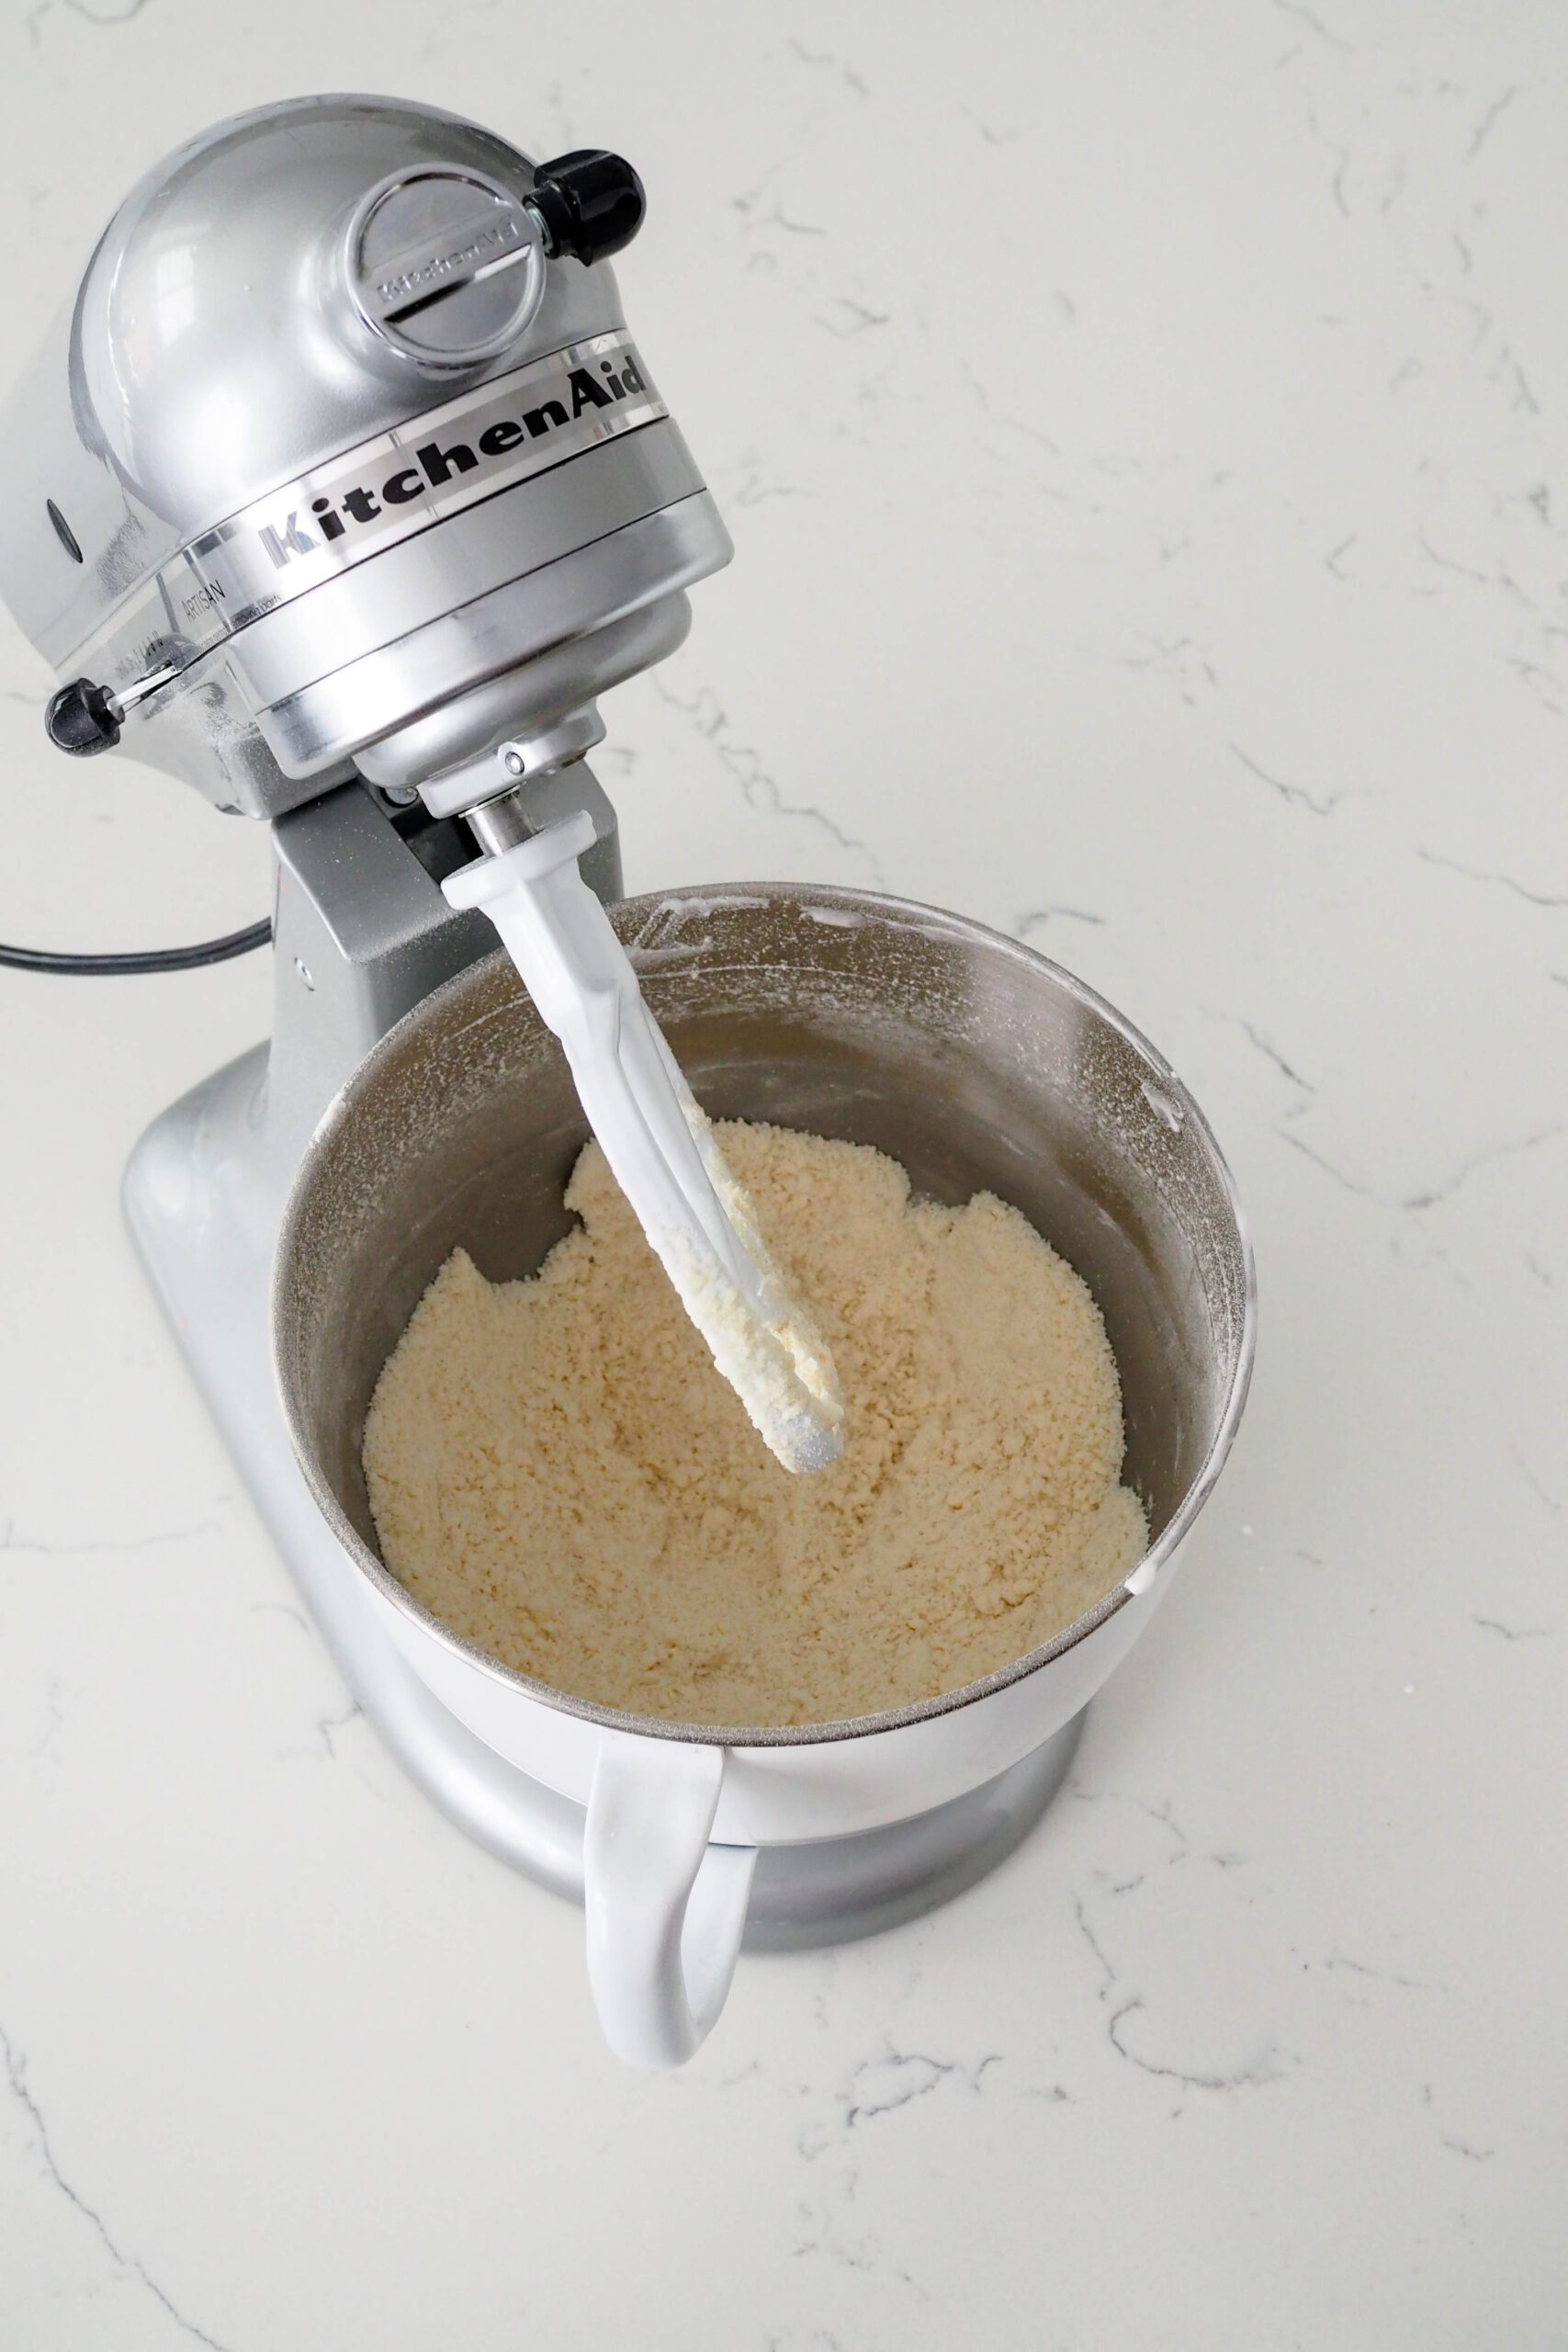 A mixer bowl has flour, sugar, butter, and leavening agents mixed together until they look like breadcrumbs.